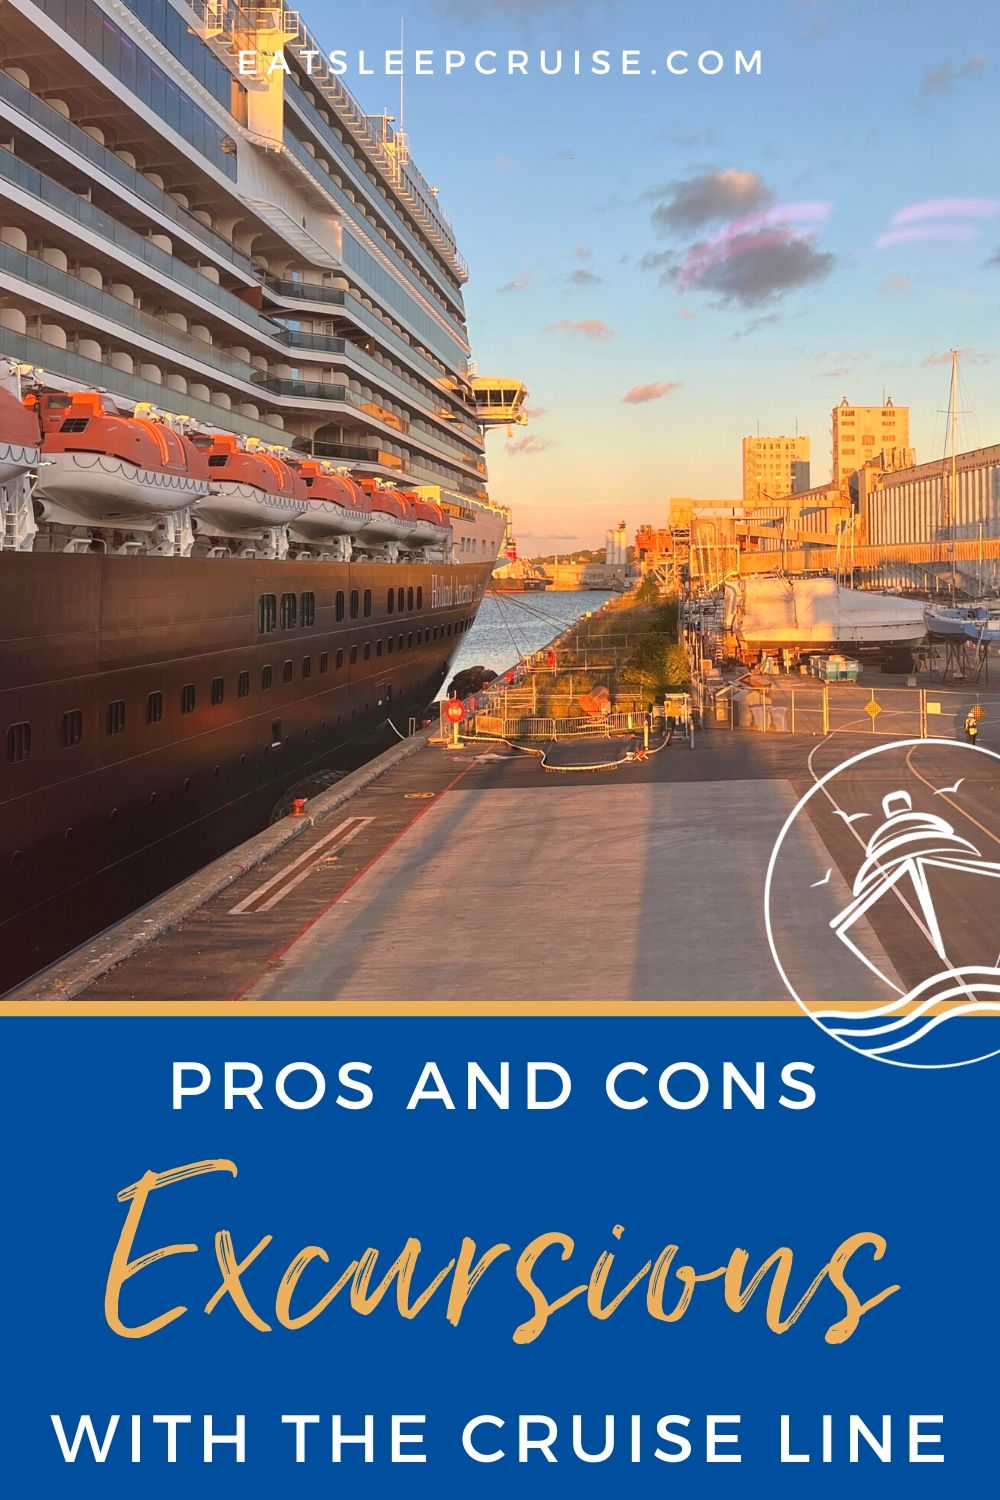 Pros and Cons of Booking Cruise Shore Excursions With the Cruise Line